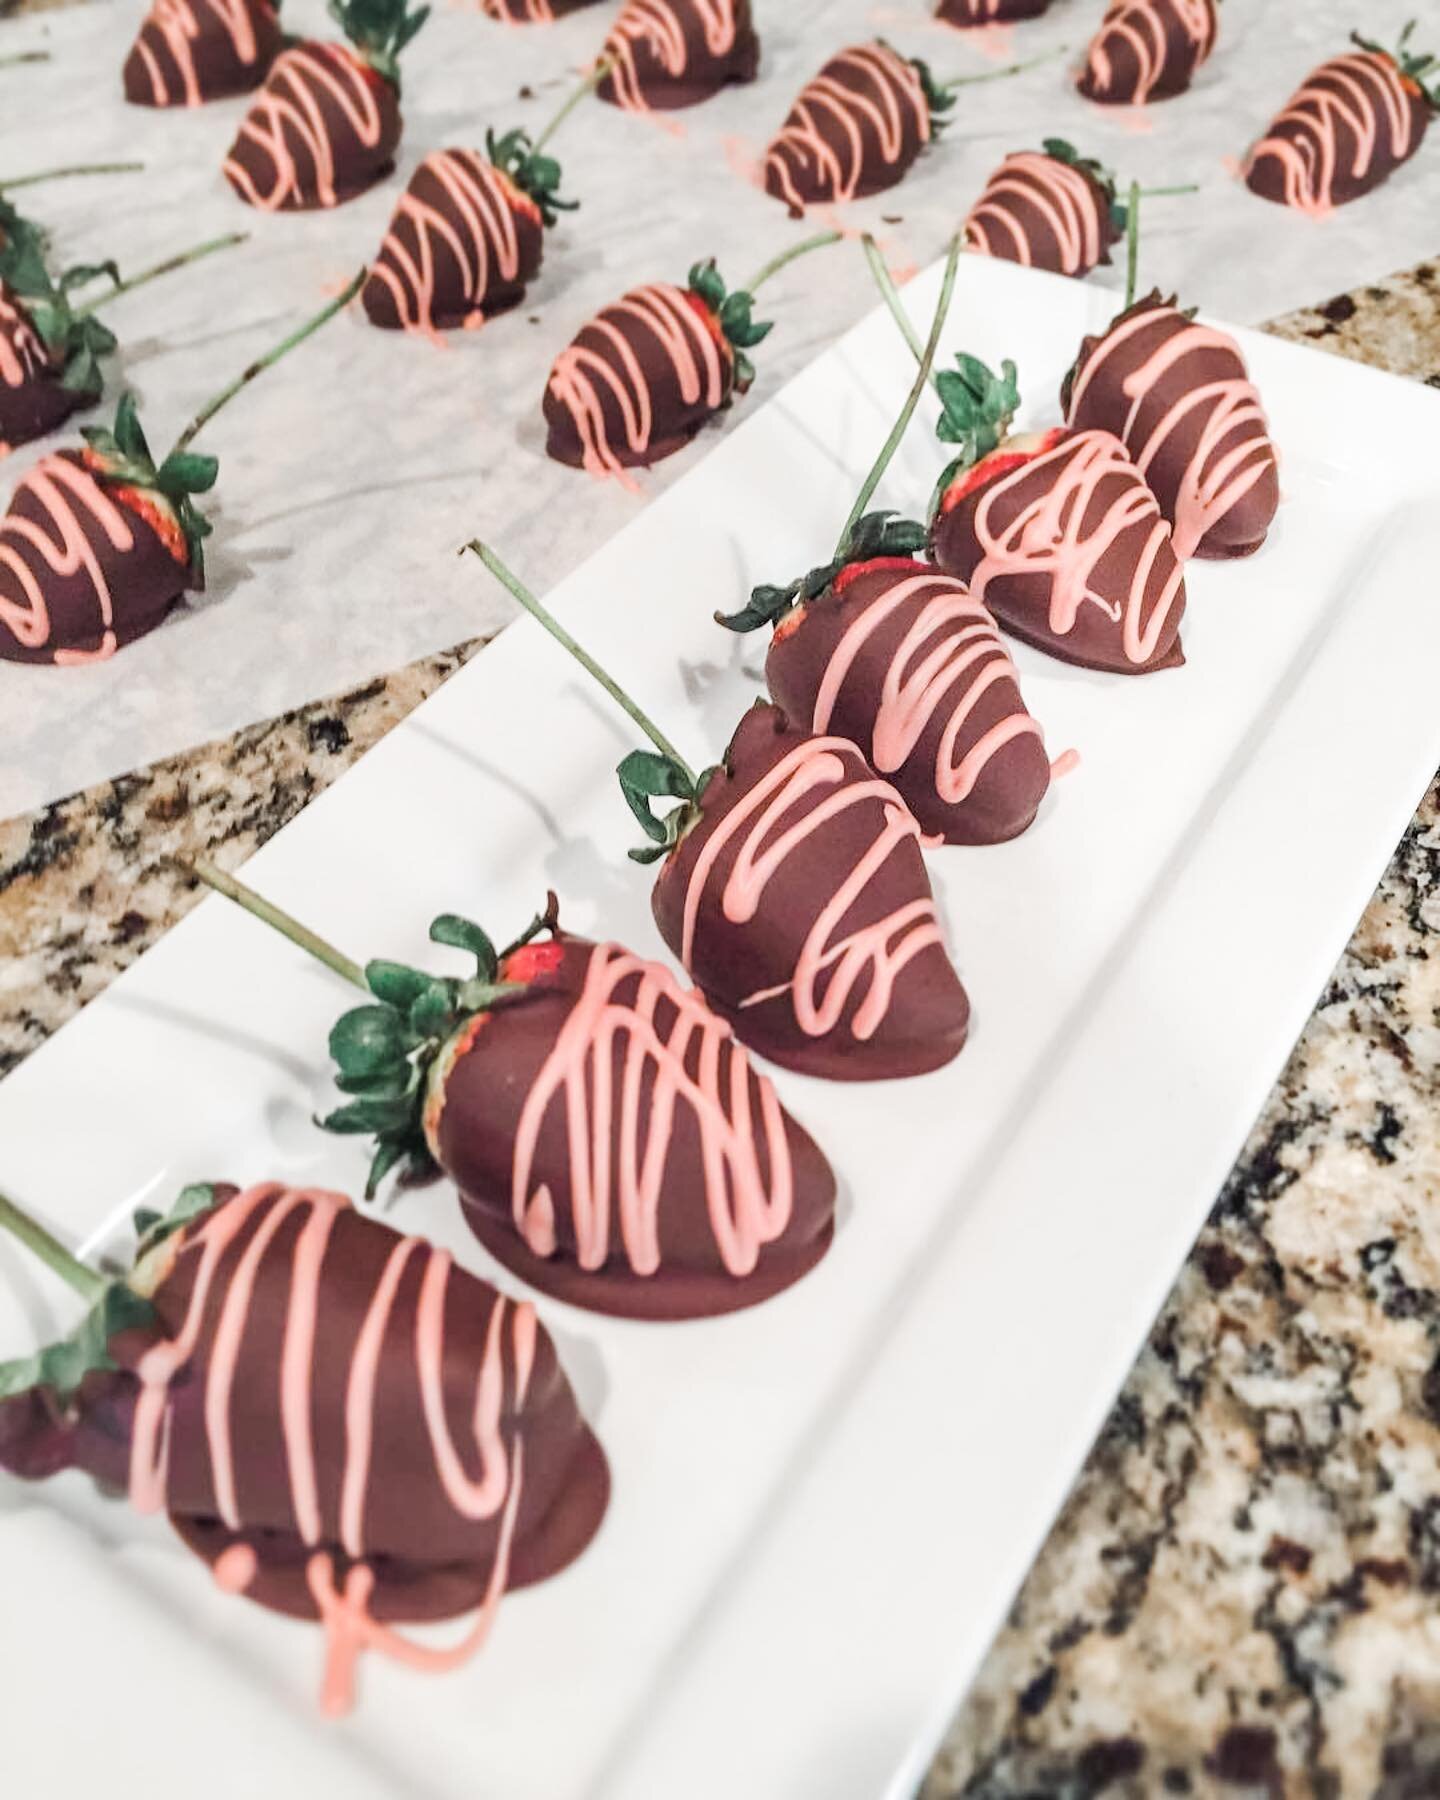 Hi Friends! Who remembers these mouth watering Dark Chocolate Covered Strawberries? In case you are wondering, I had a RECIPE blog many moons ago on a previous platform. YES I shared ALL the secrets on how to get this chocolate smooth as &lsquo;eva f